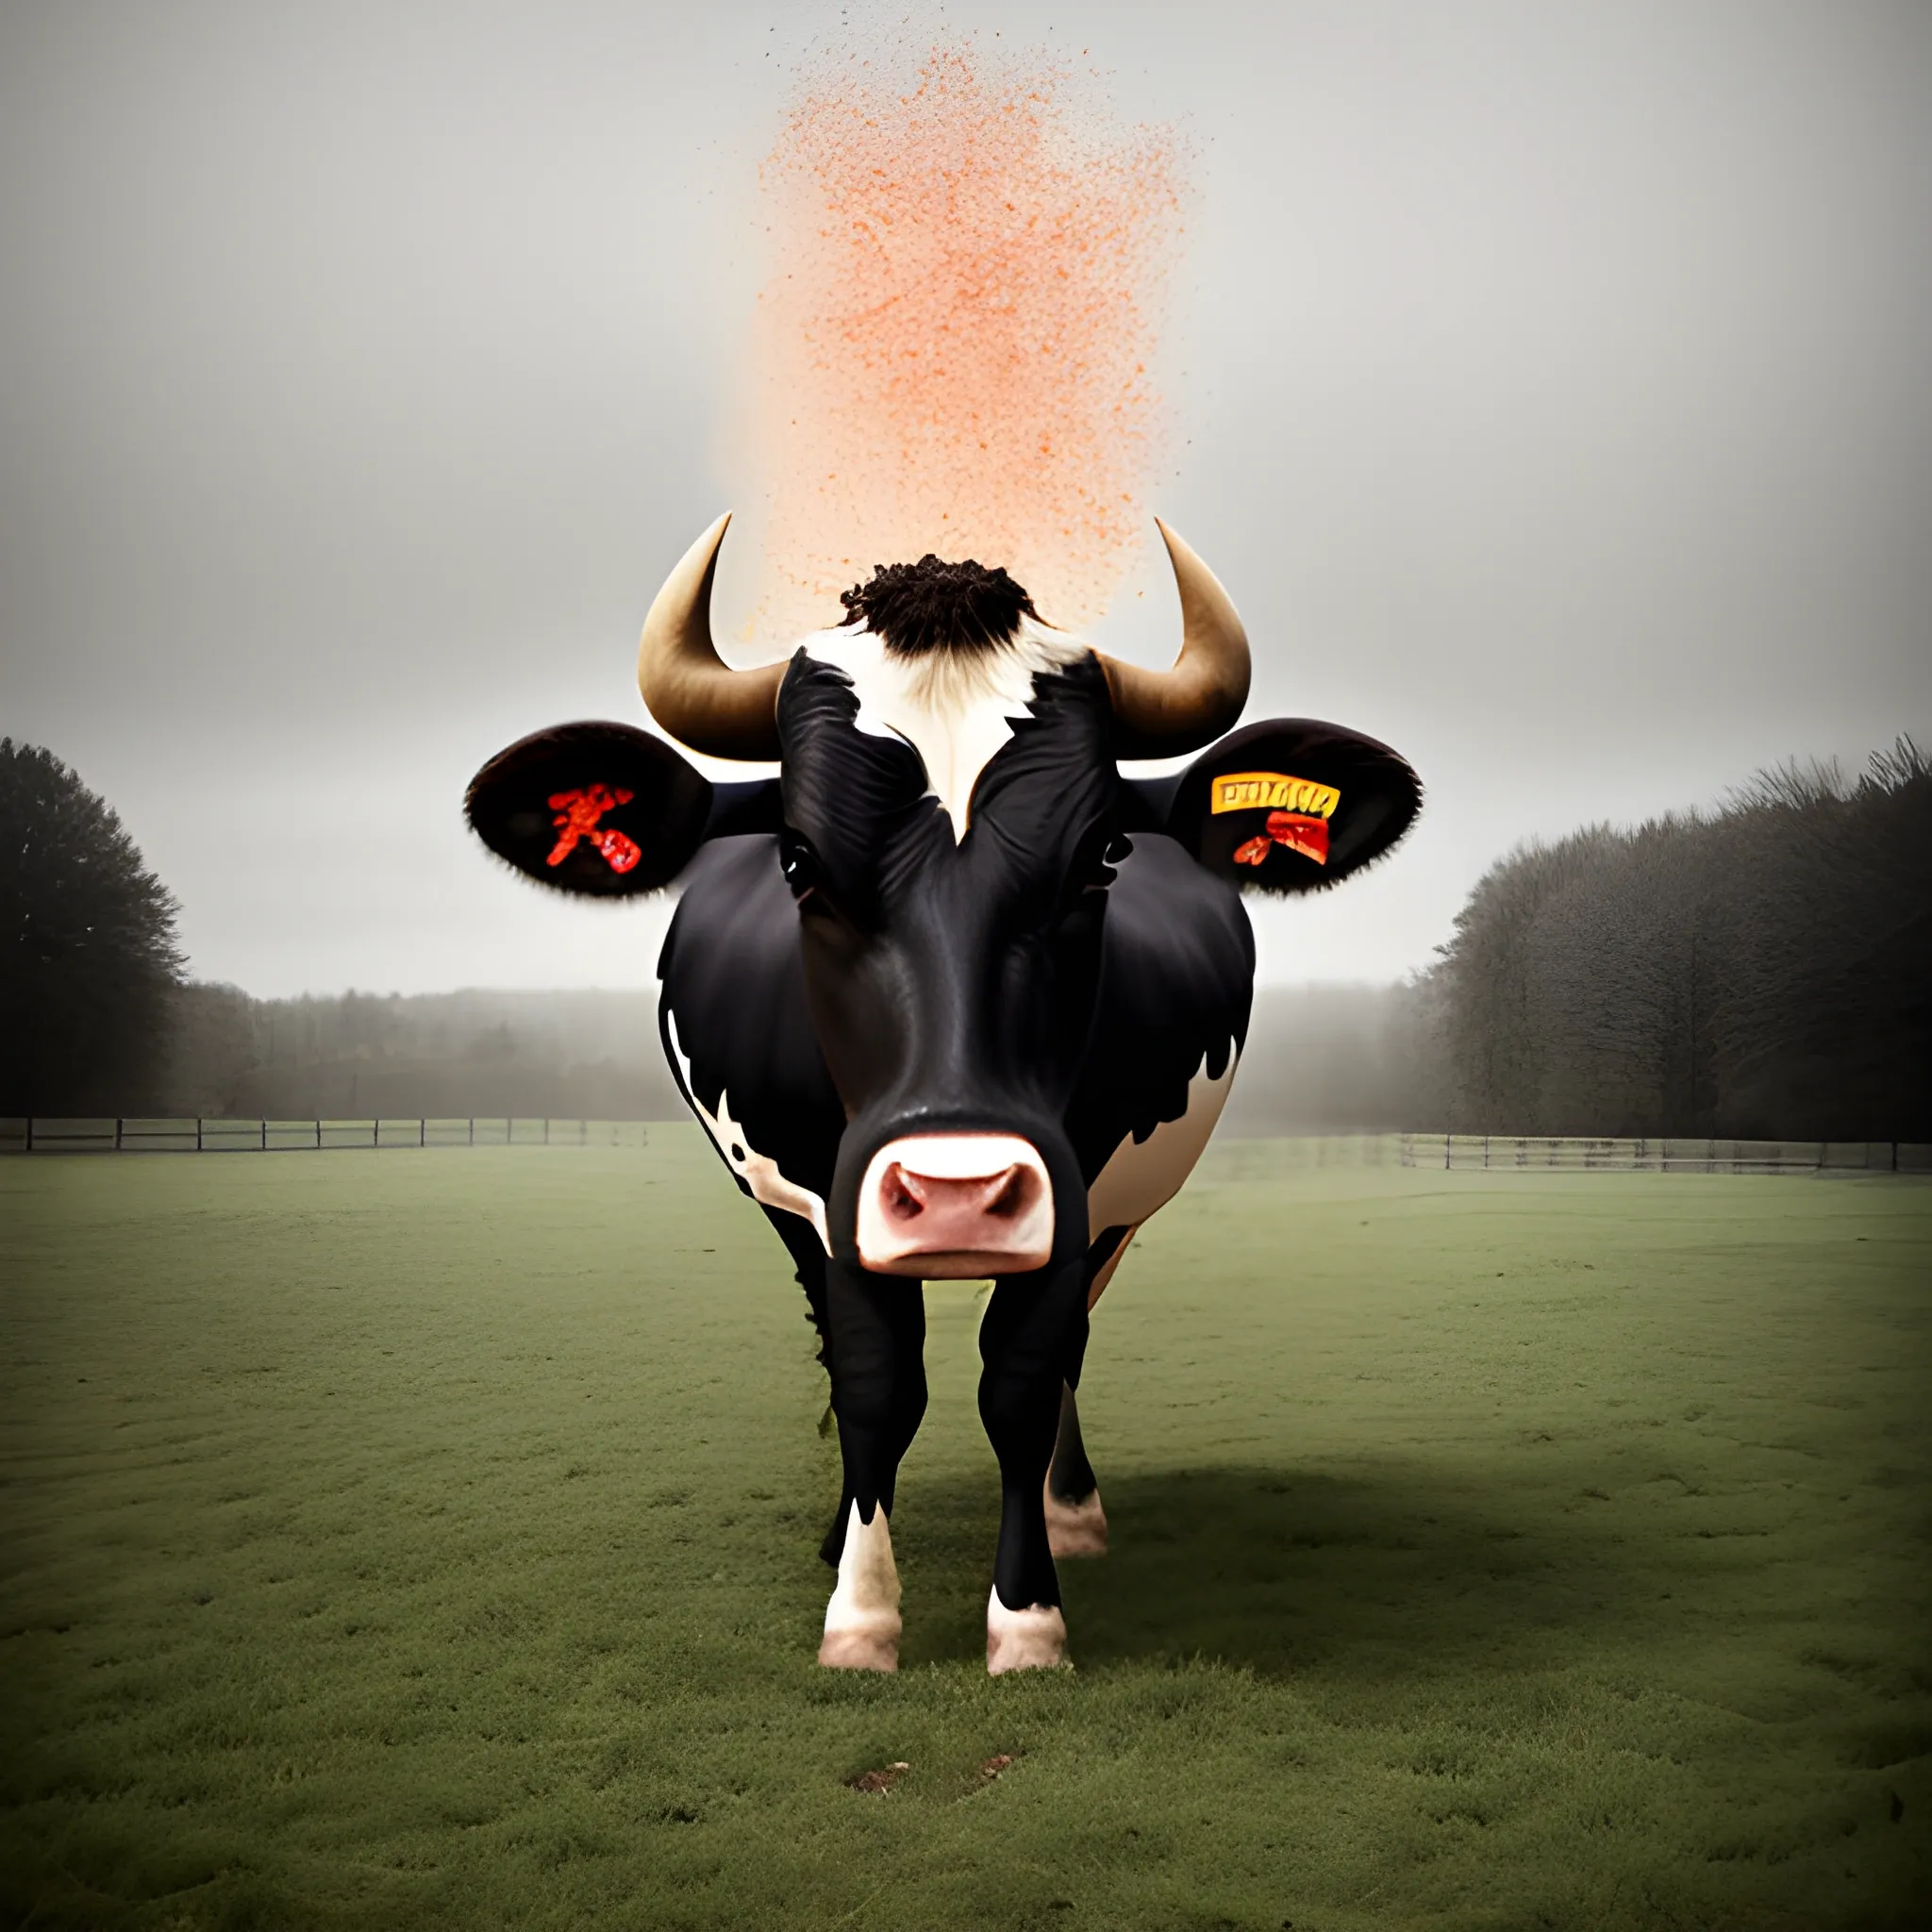 exploded cow, photography